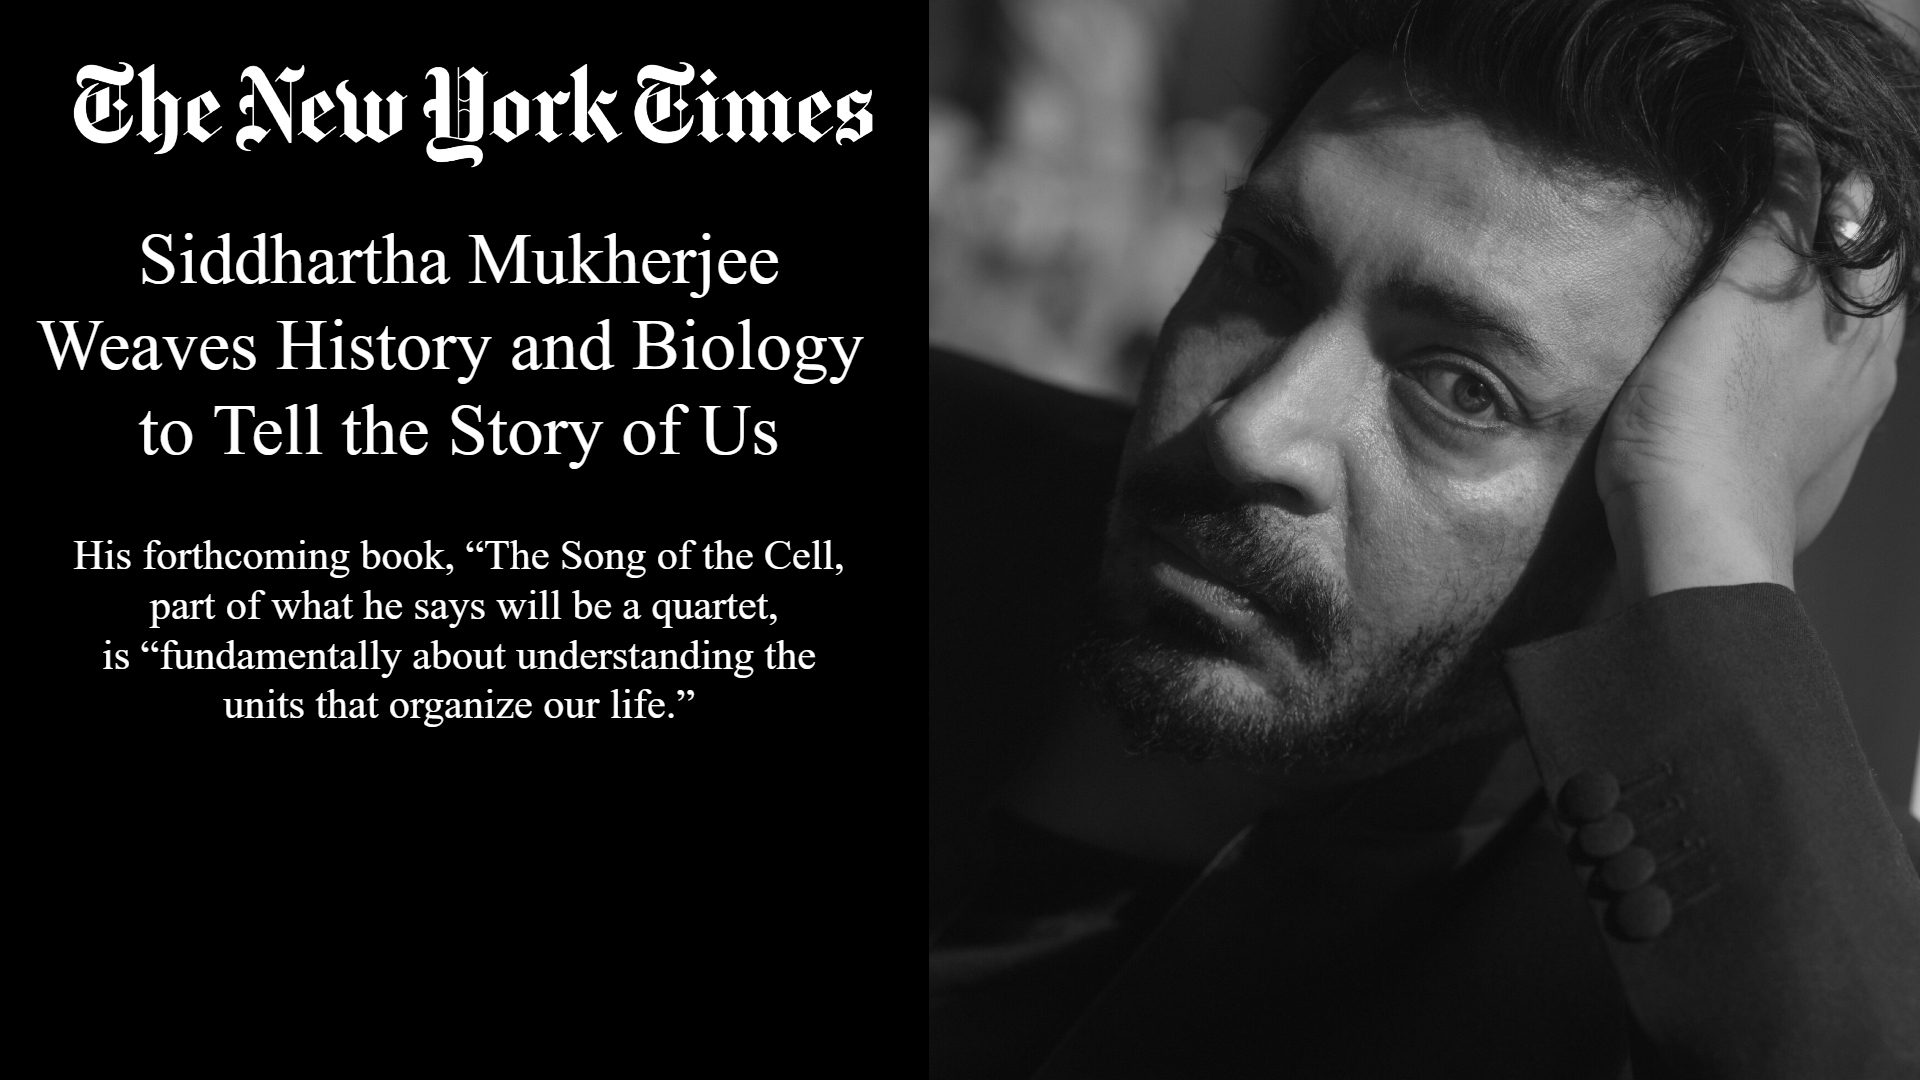 New York Times “The Song of the Cell" preview